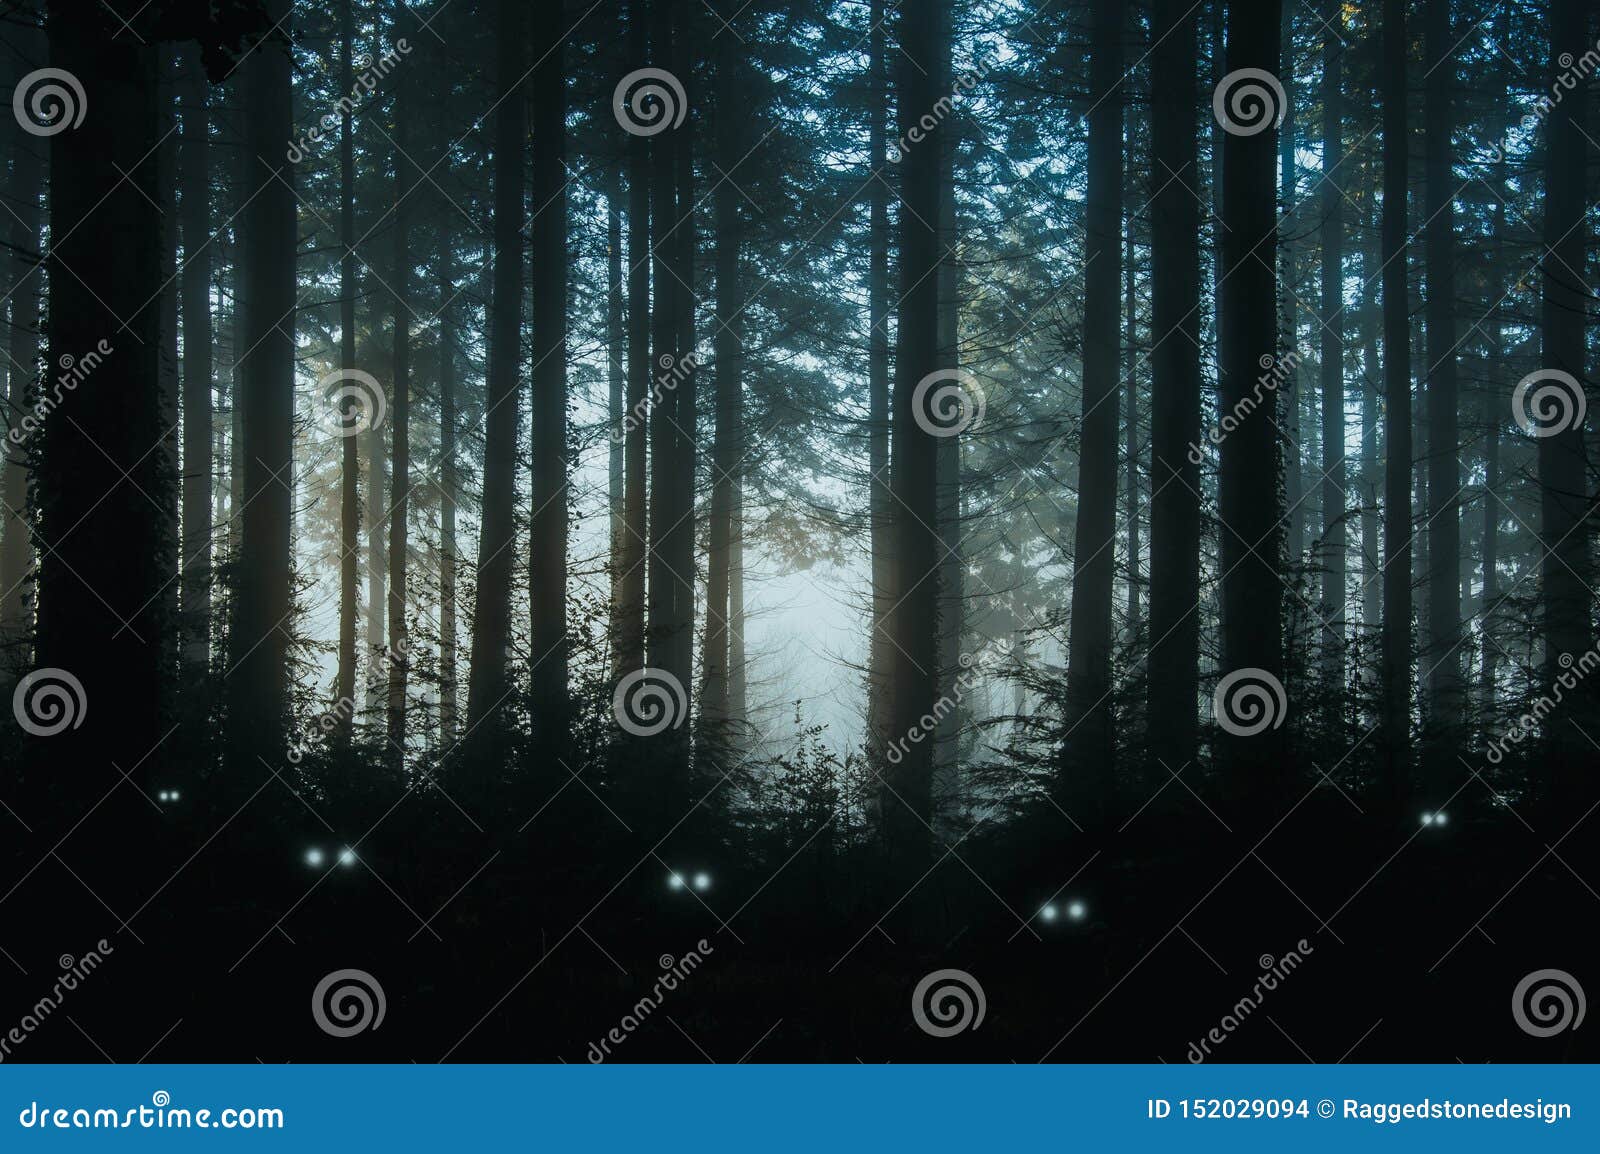 a creepy, fantasy forest of pine trees, back lighted with spooky, glowing eyes of creatures in the undergrowth